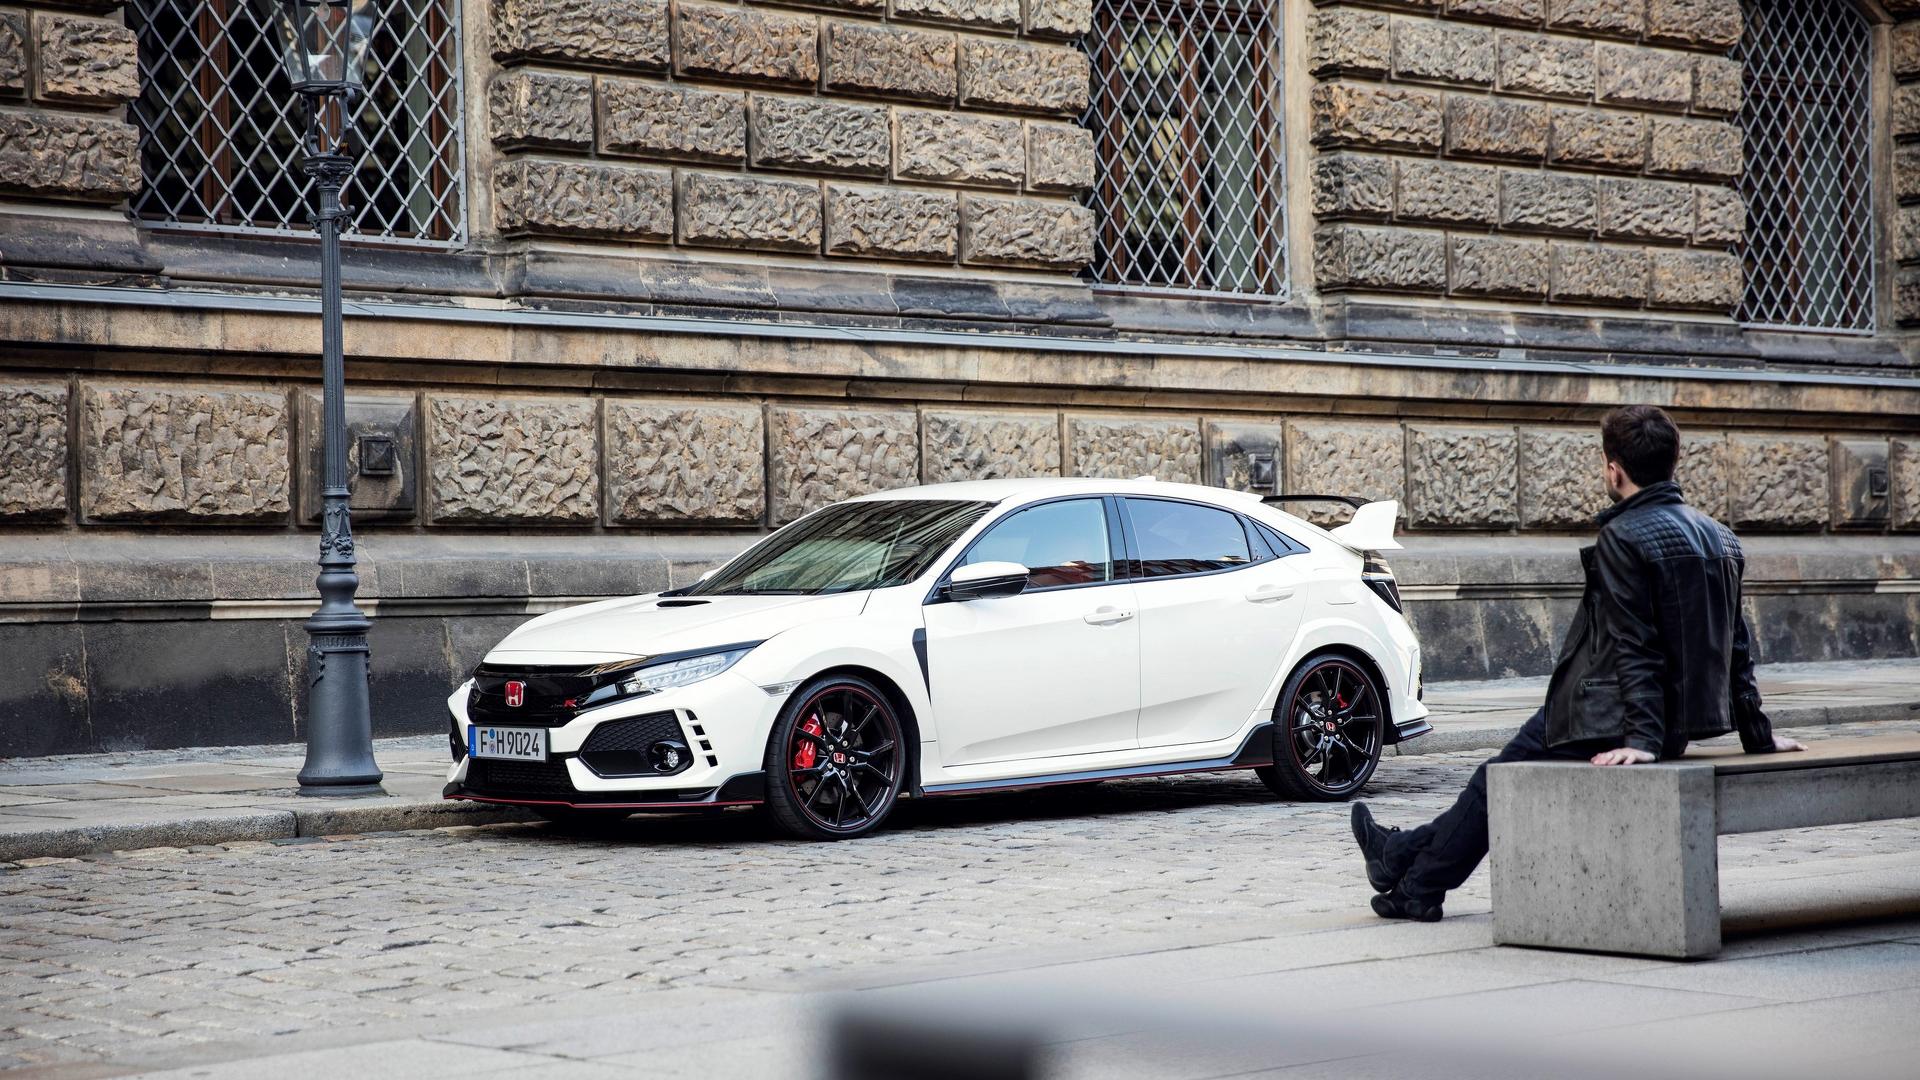 2018 Honda Civic Type R Gets New Photo Gallery And Sound Check On